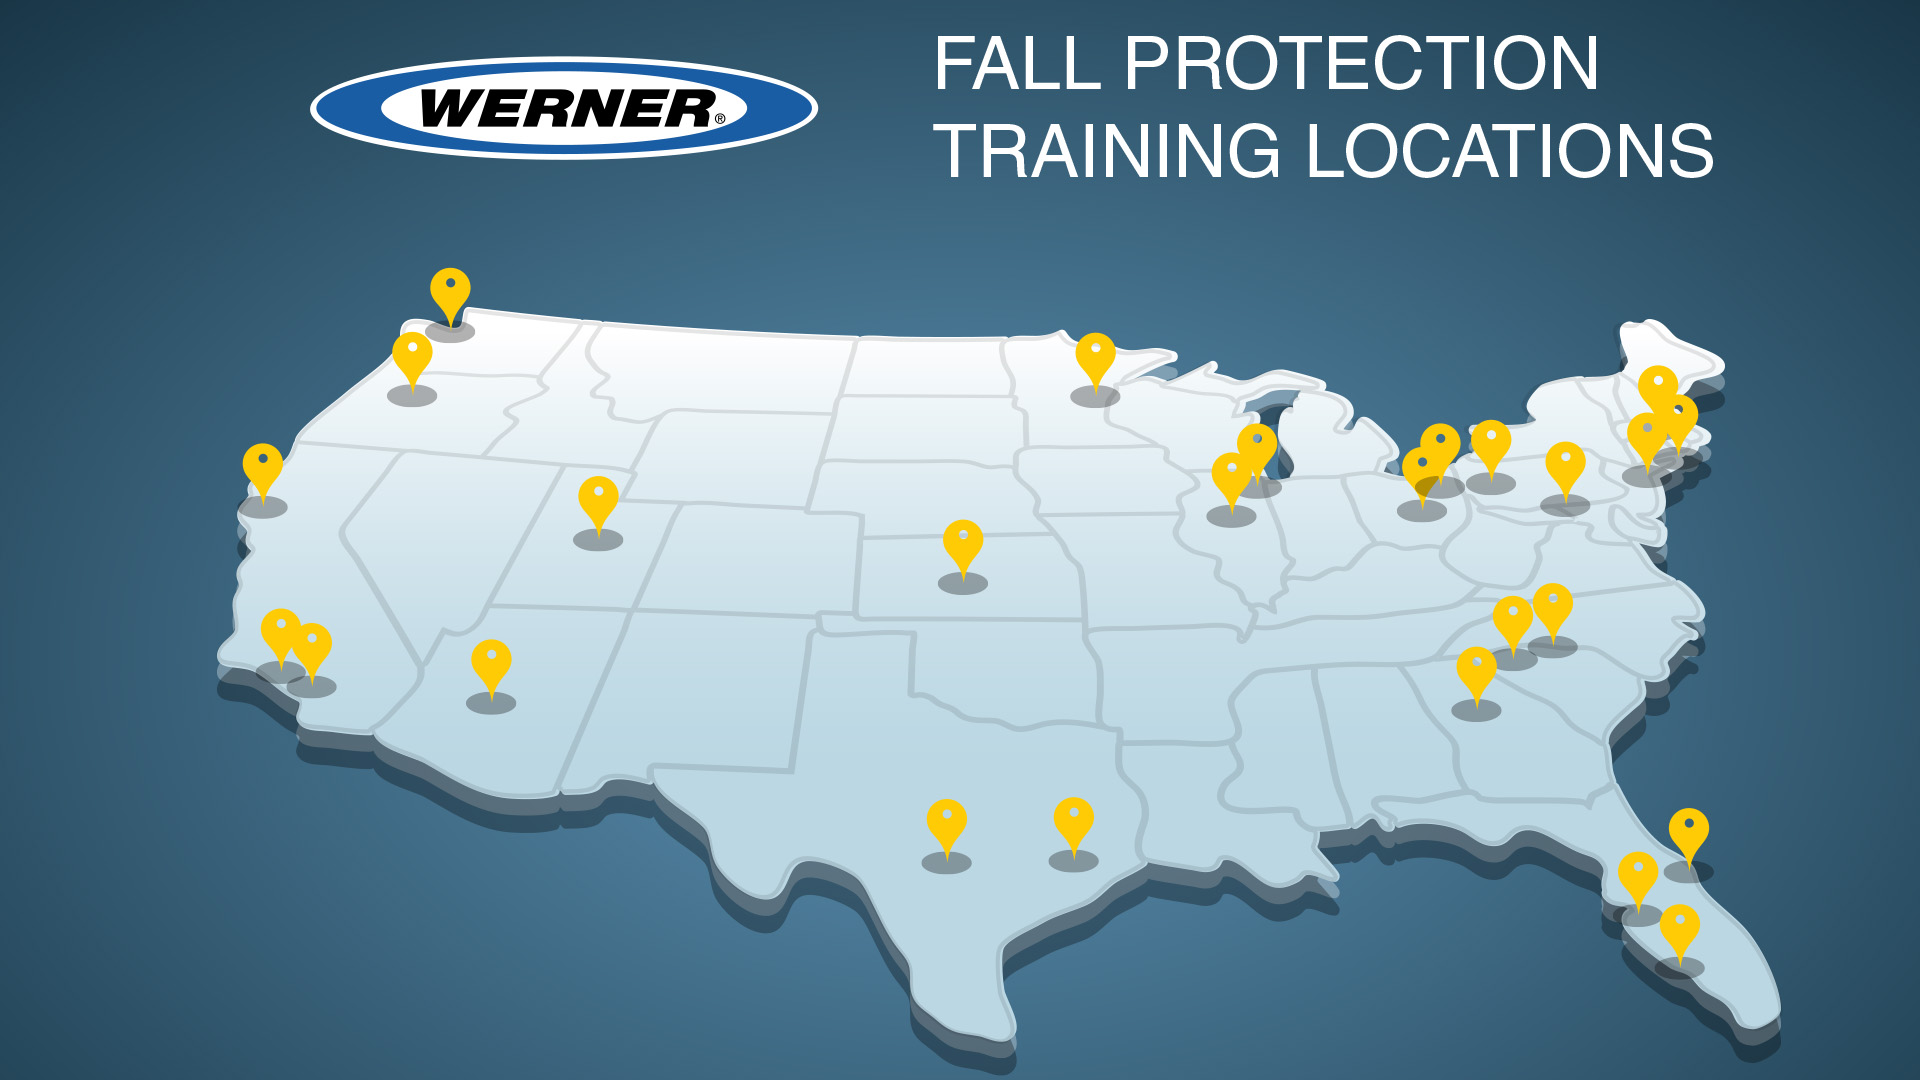 Werner Fall Protection Training Locations